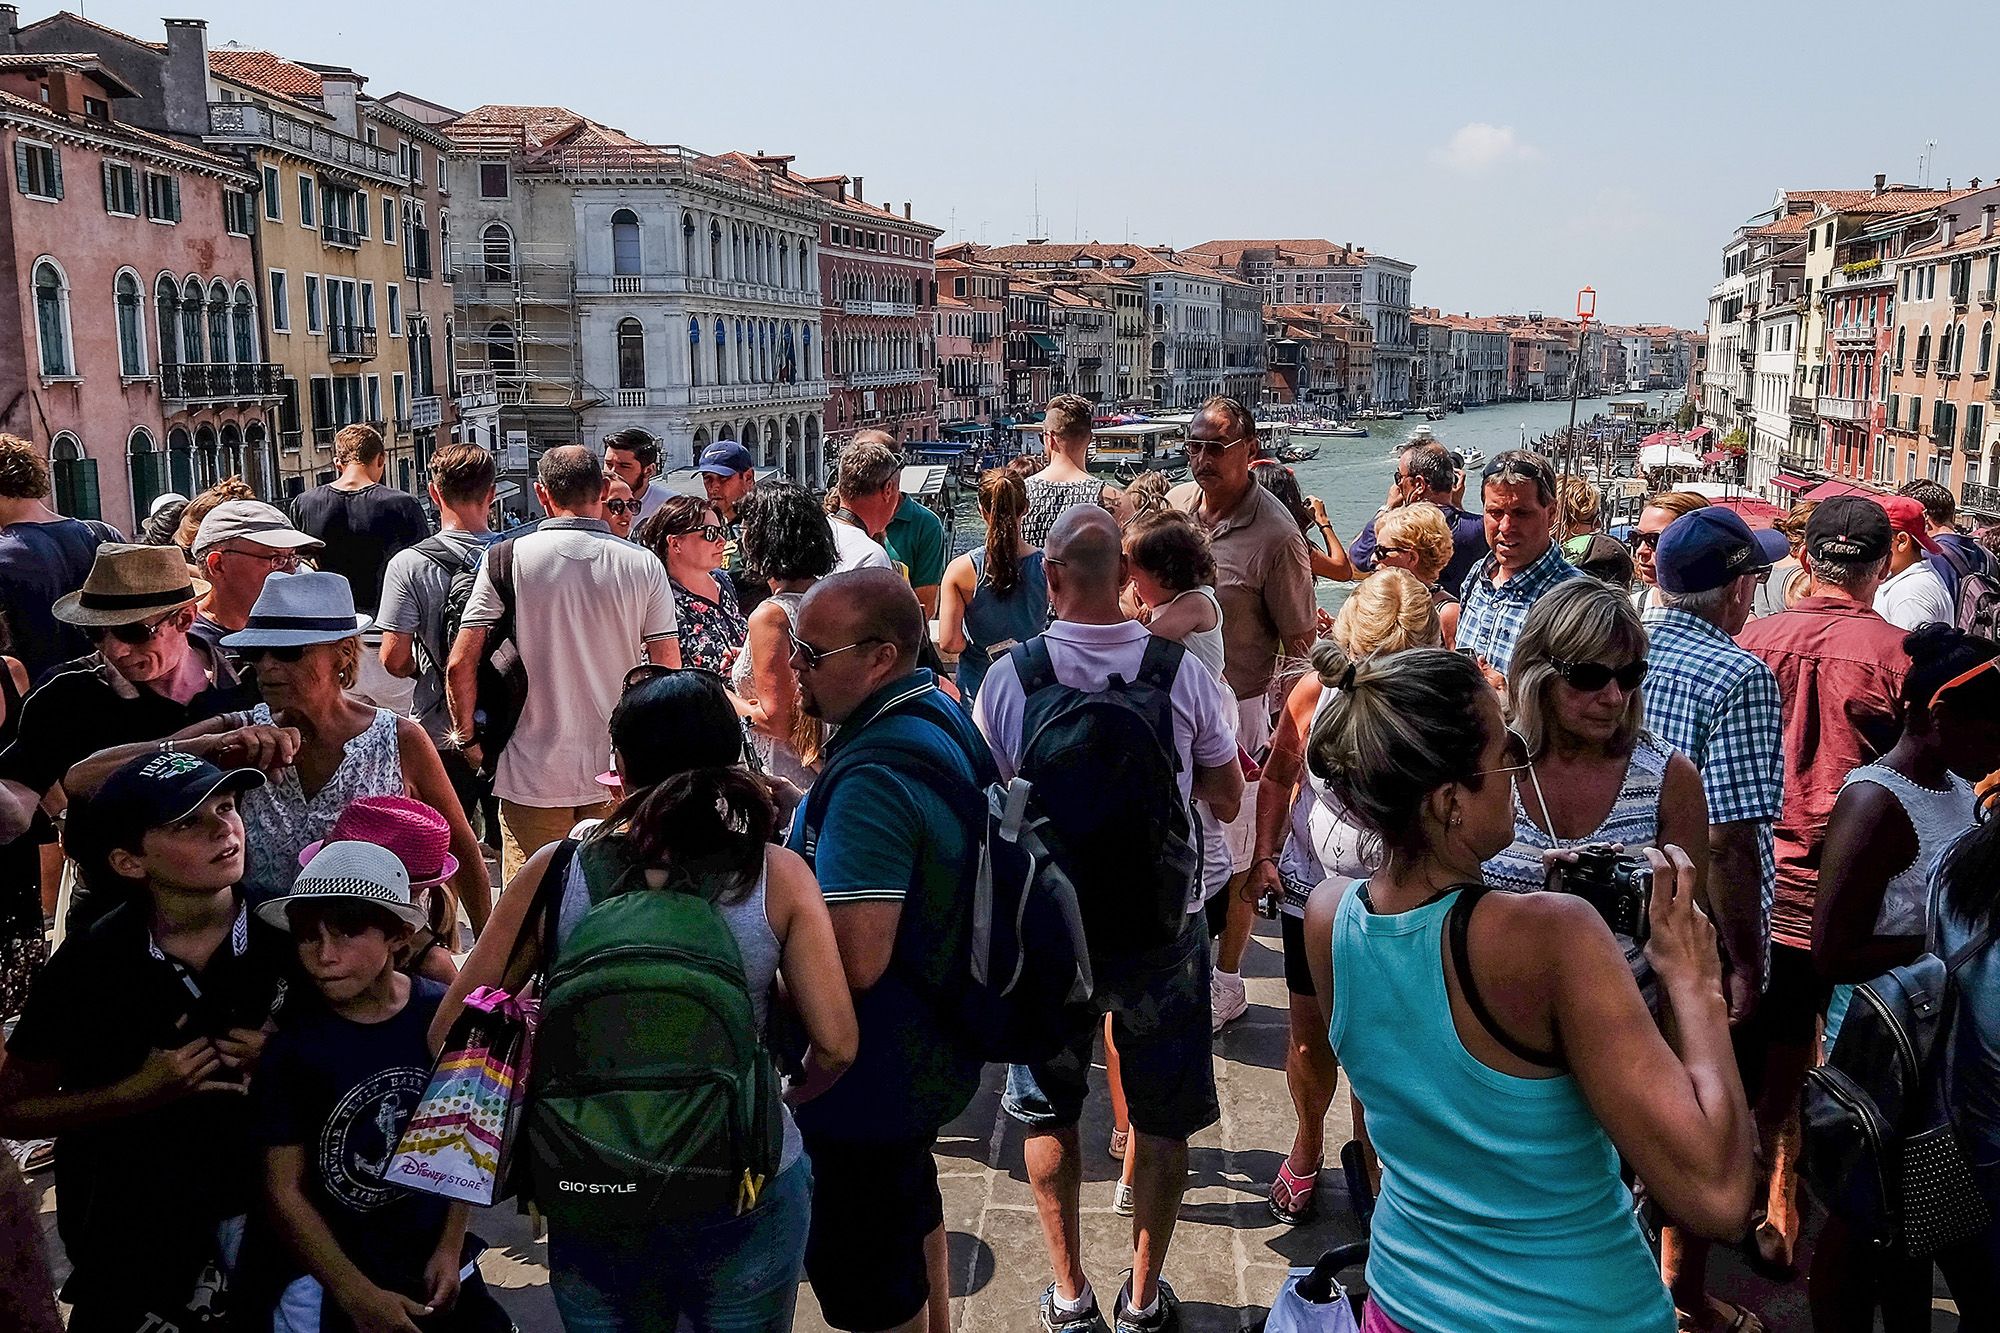 Previously, more than 100,000 people poured into Venice on some holidays, leading to scenes like th...